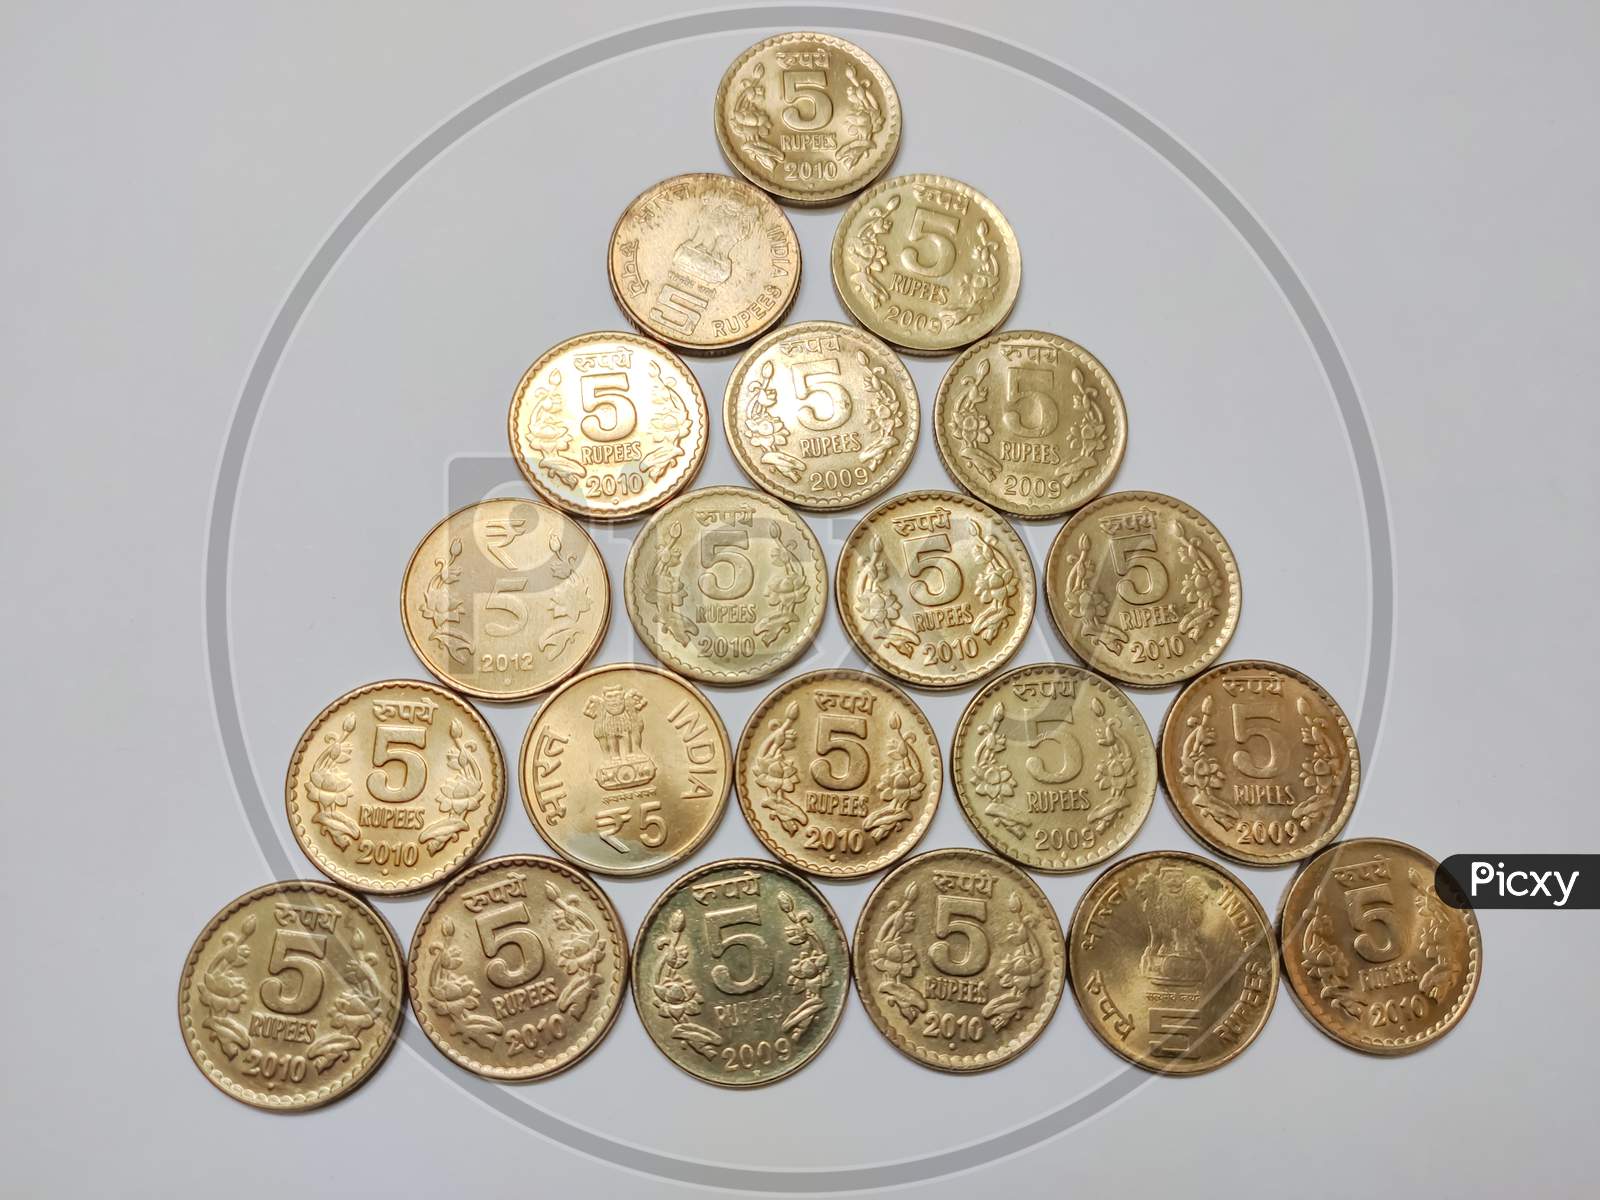 Pyramid of Indian five rupee coins against white background. Stack of Indian 5 rupee coins isolated on white background